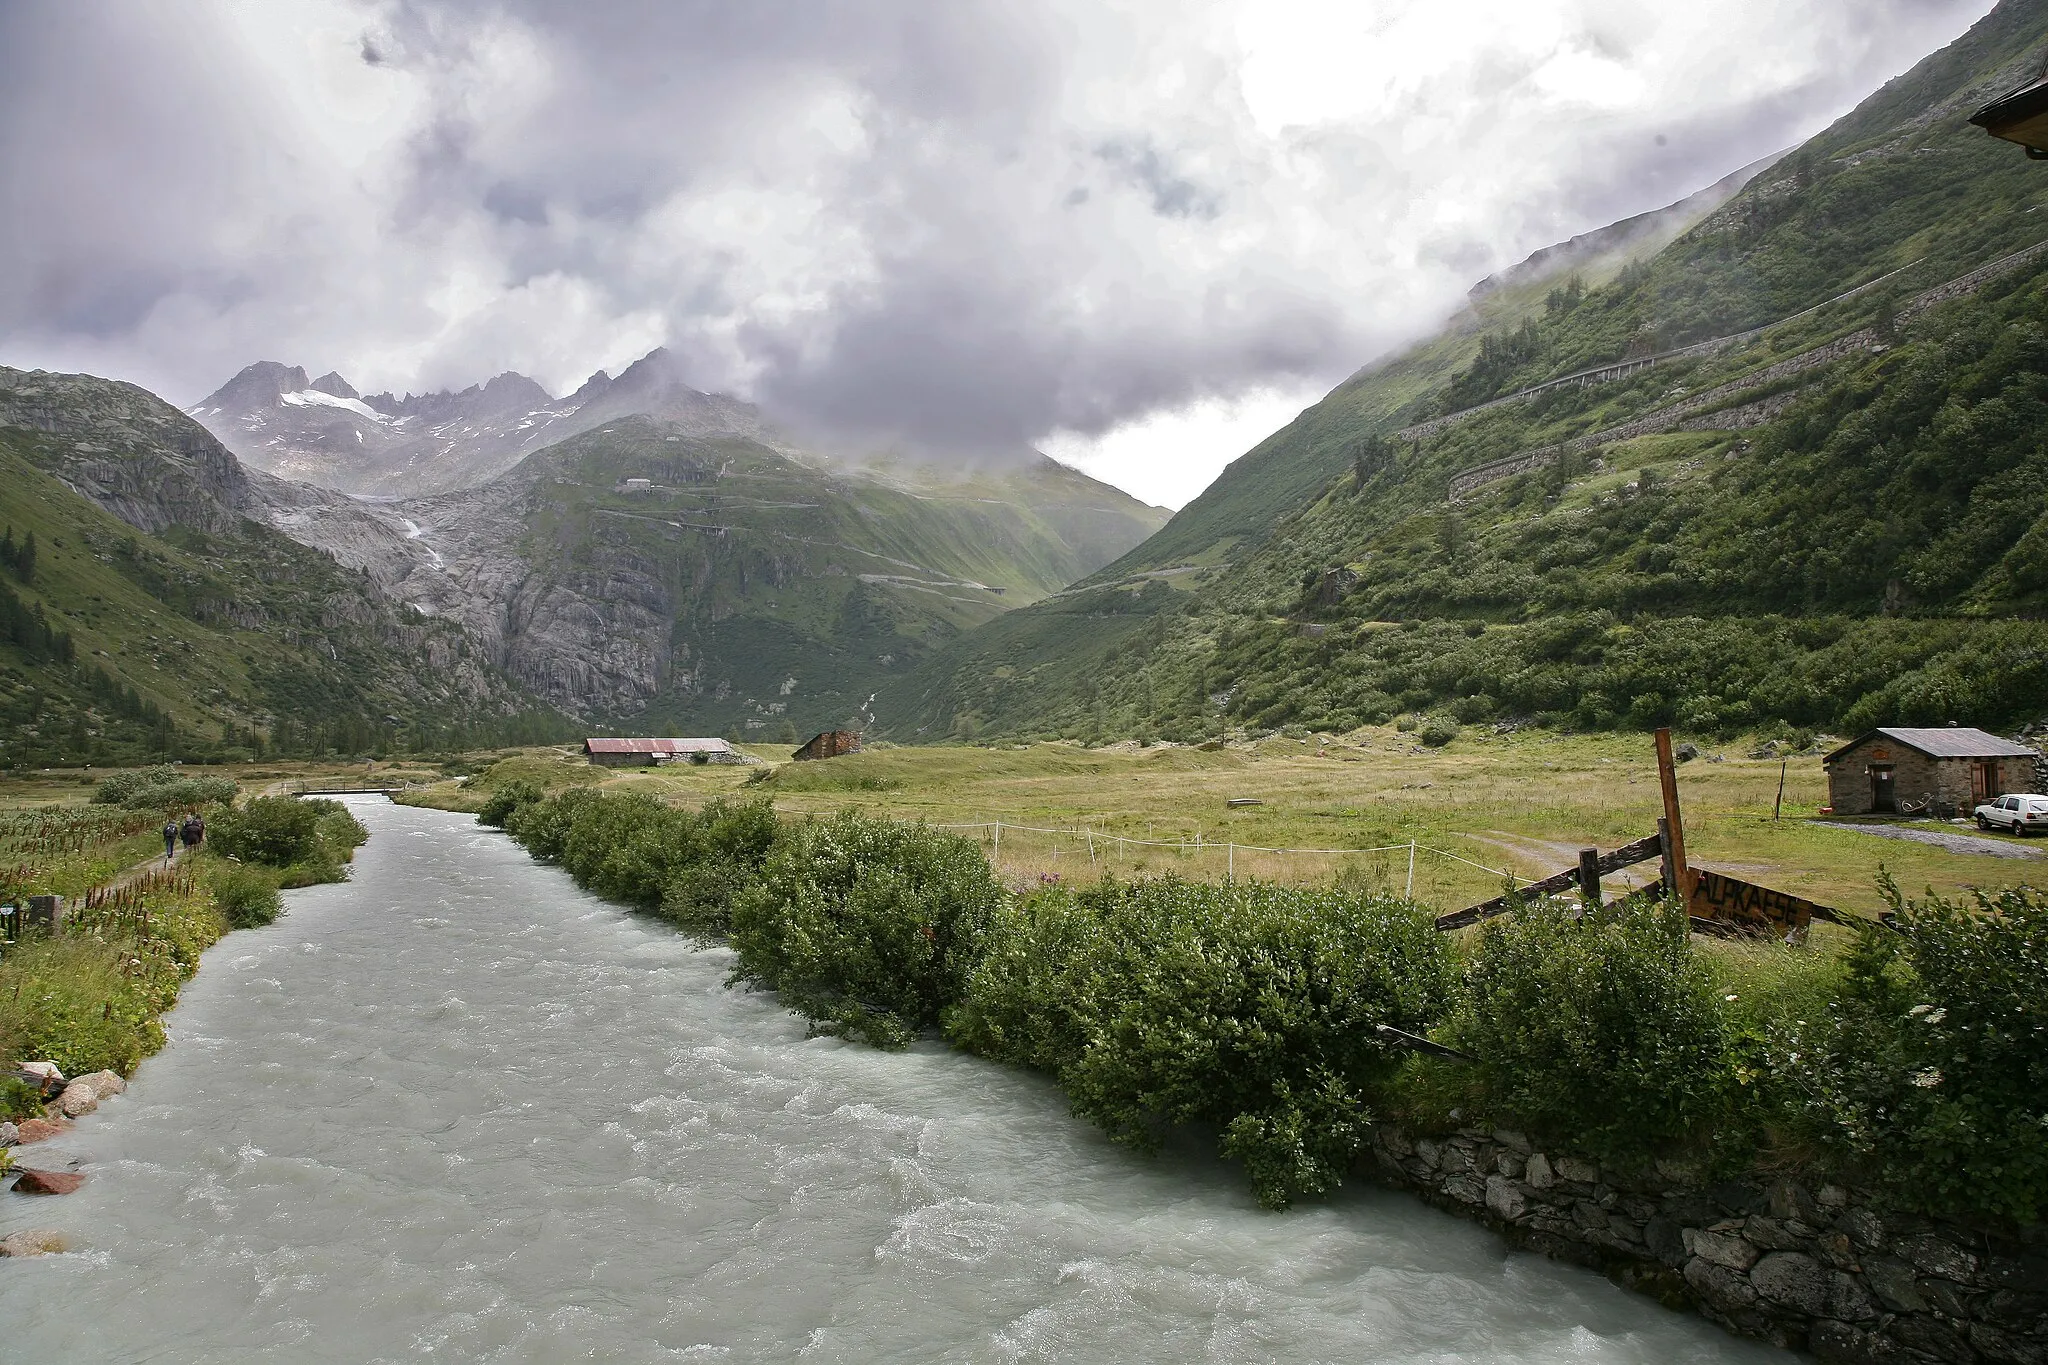 Photo showing: Upper reaches of the Rhone river, Rhone glacier and Furka mountain pass in the background.